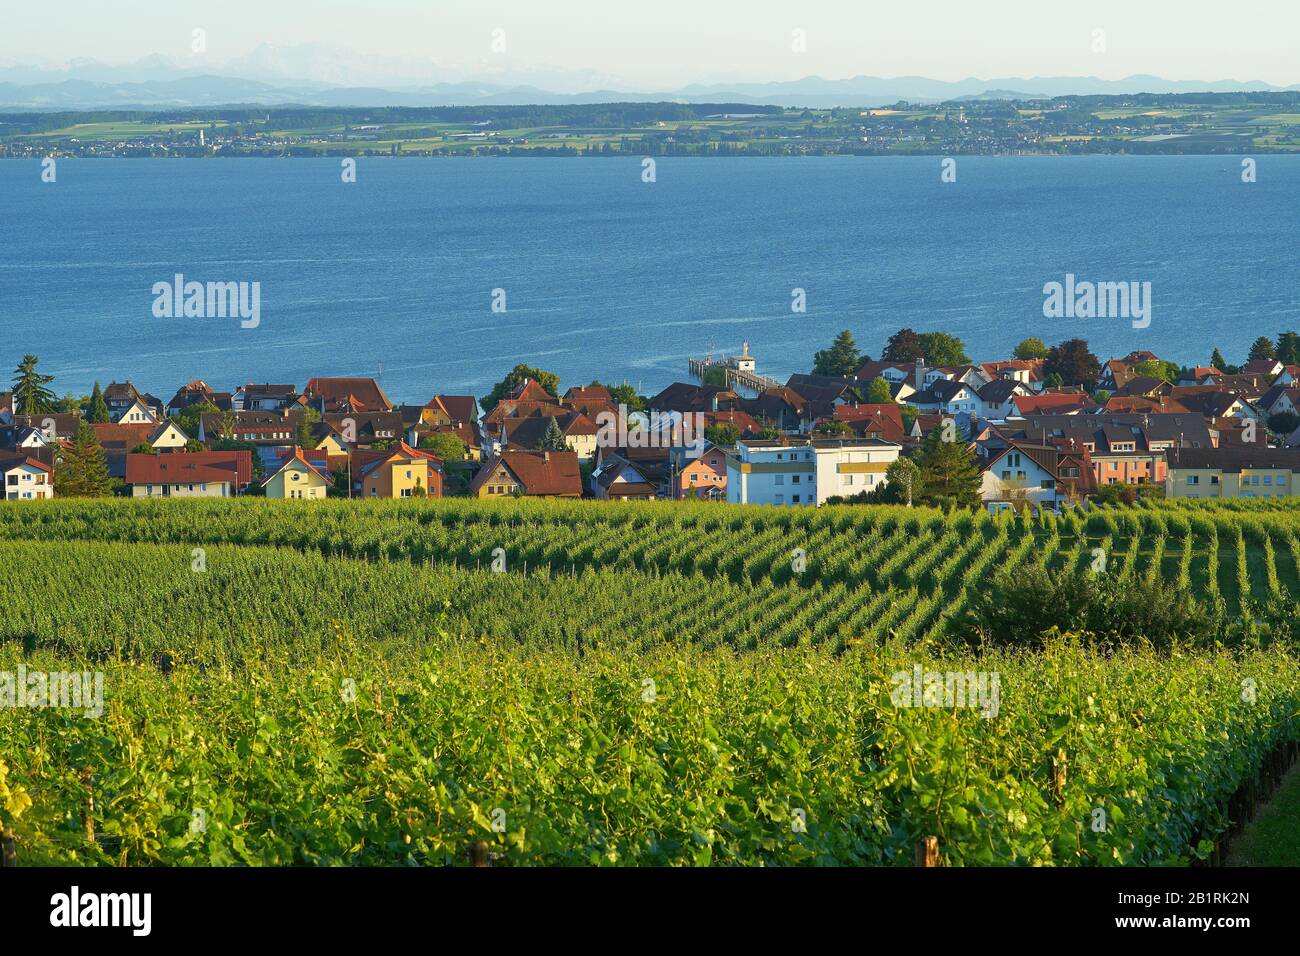 Hagnau on Lake Constance, Baden-Württemberg, Germany. Hagnau is a small village with vineyards and in the background you can see the Swiss mountains. Stock Photo